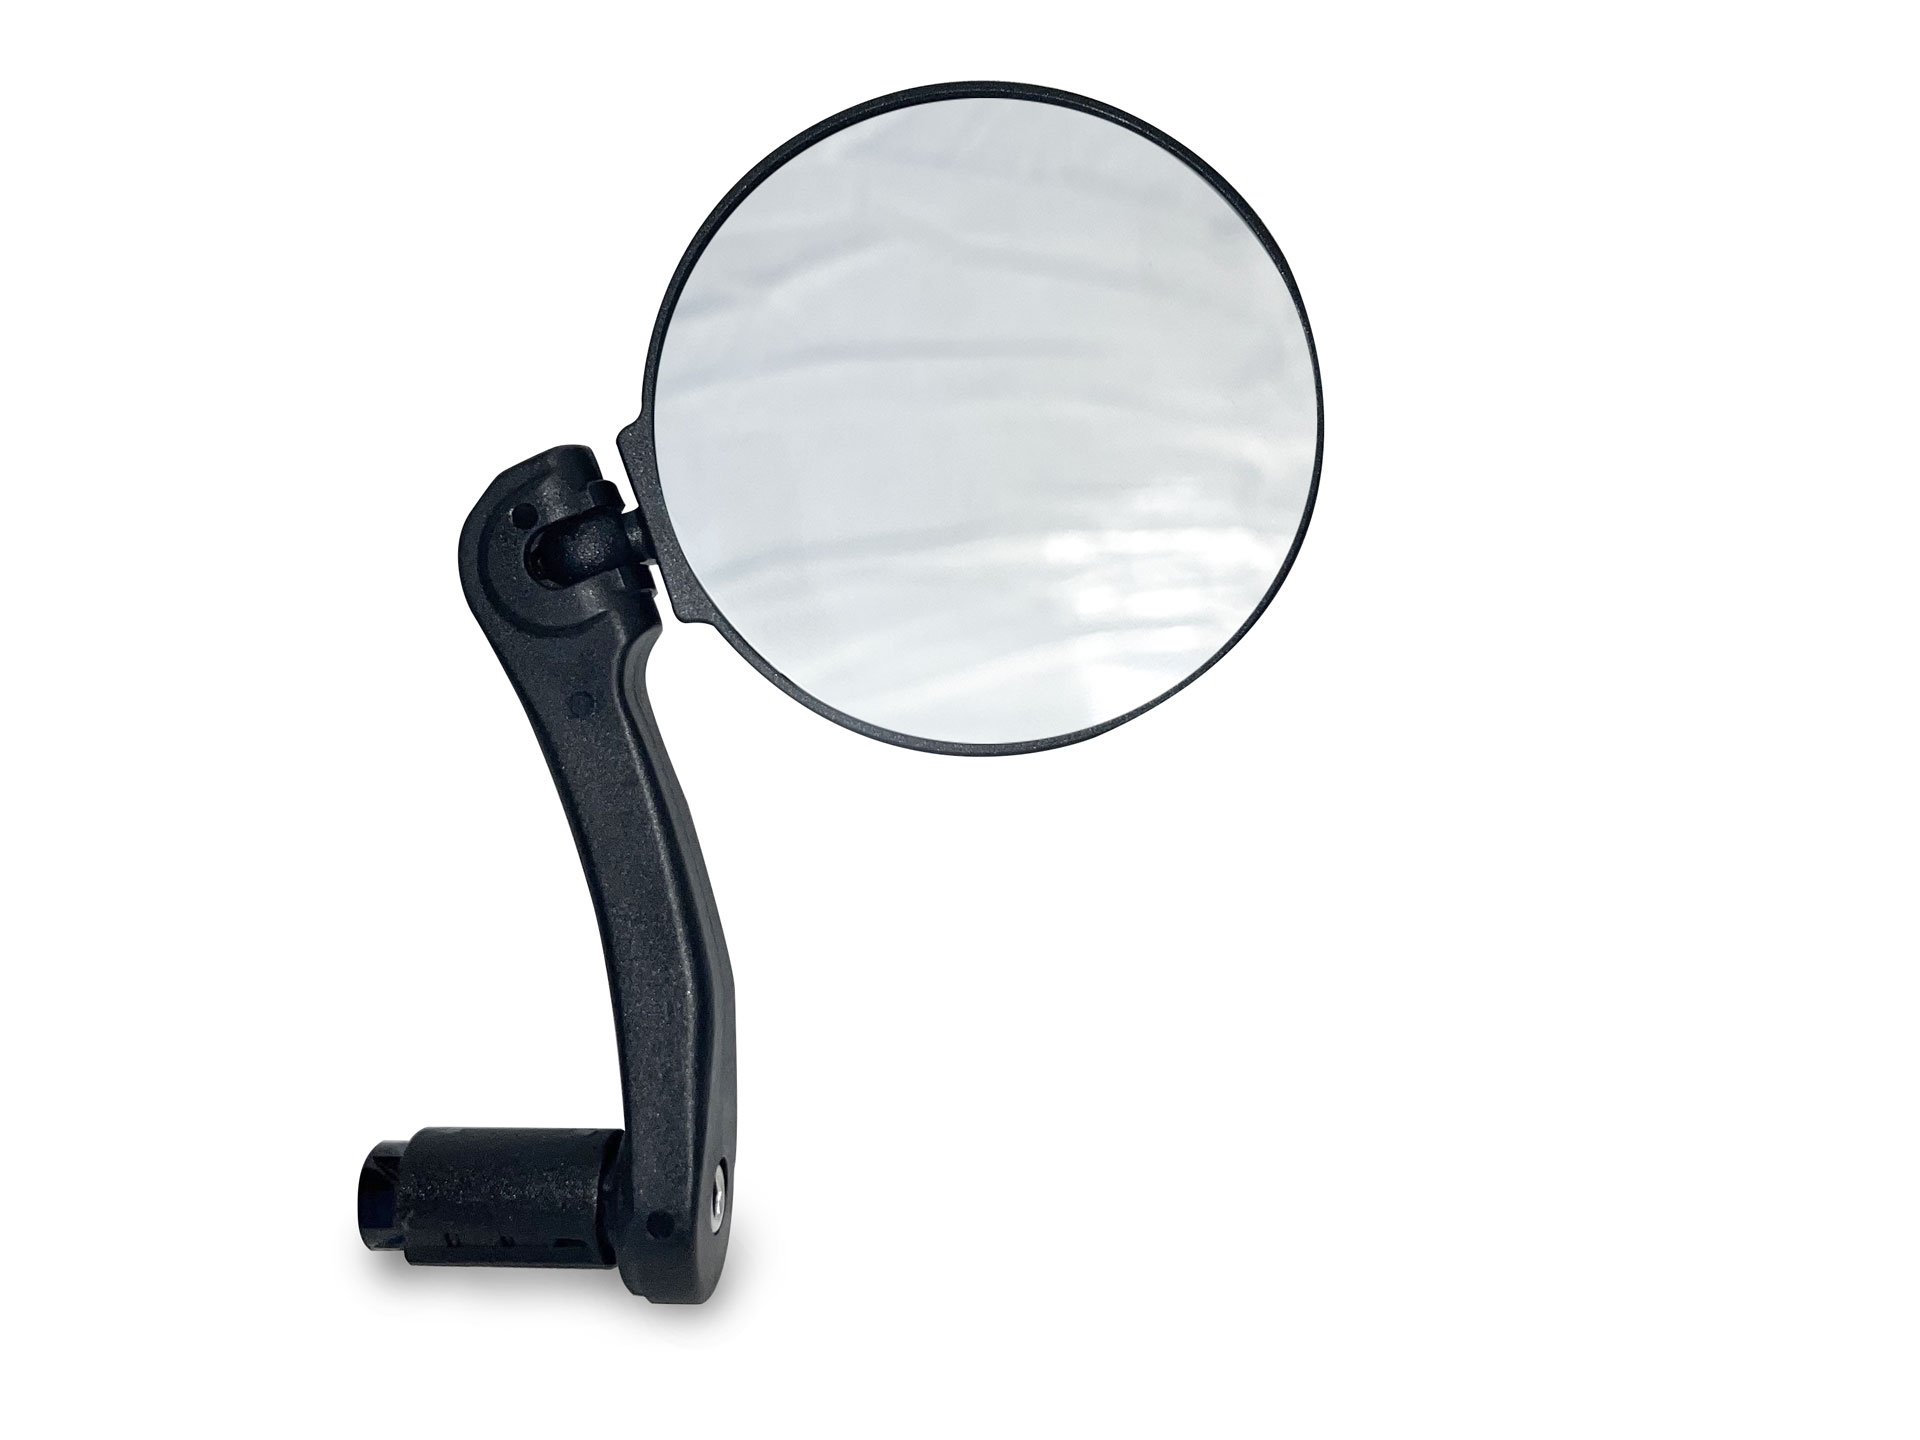 https://store.electricbikecompany.com/wp-content/uploads/2019/06/ebc-rearview-mirror-03.jpg